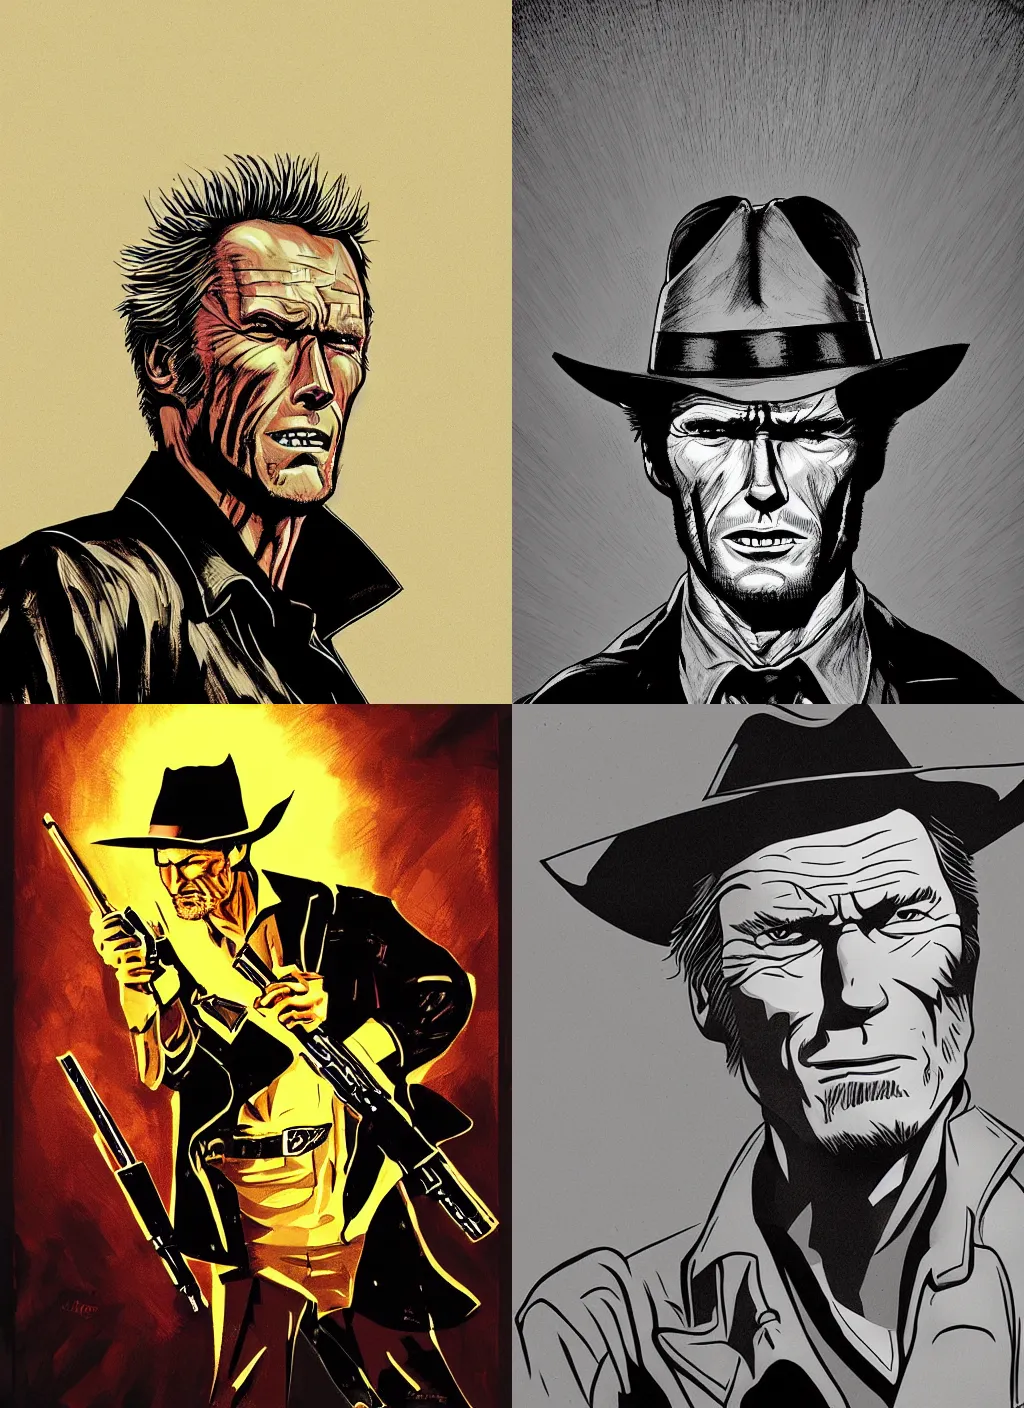 Prompt: comic strip style portrait of clint eastwood as a gunslinger, dramatic lighting